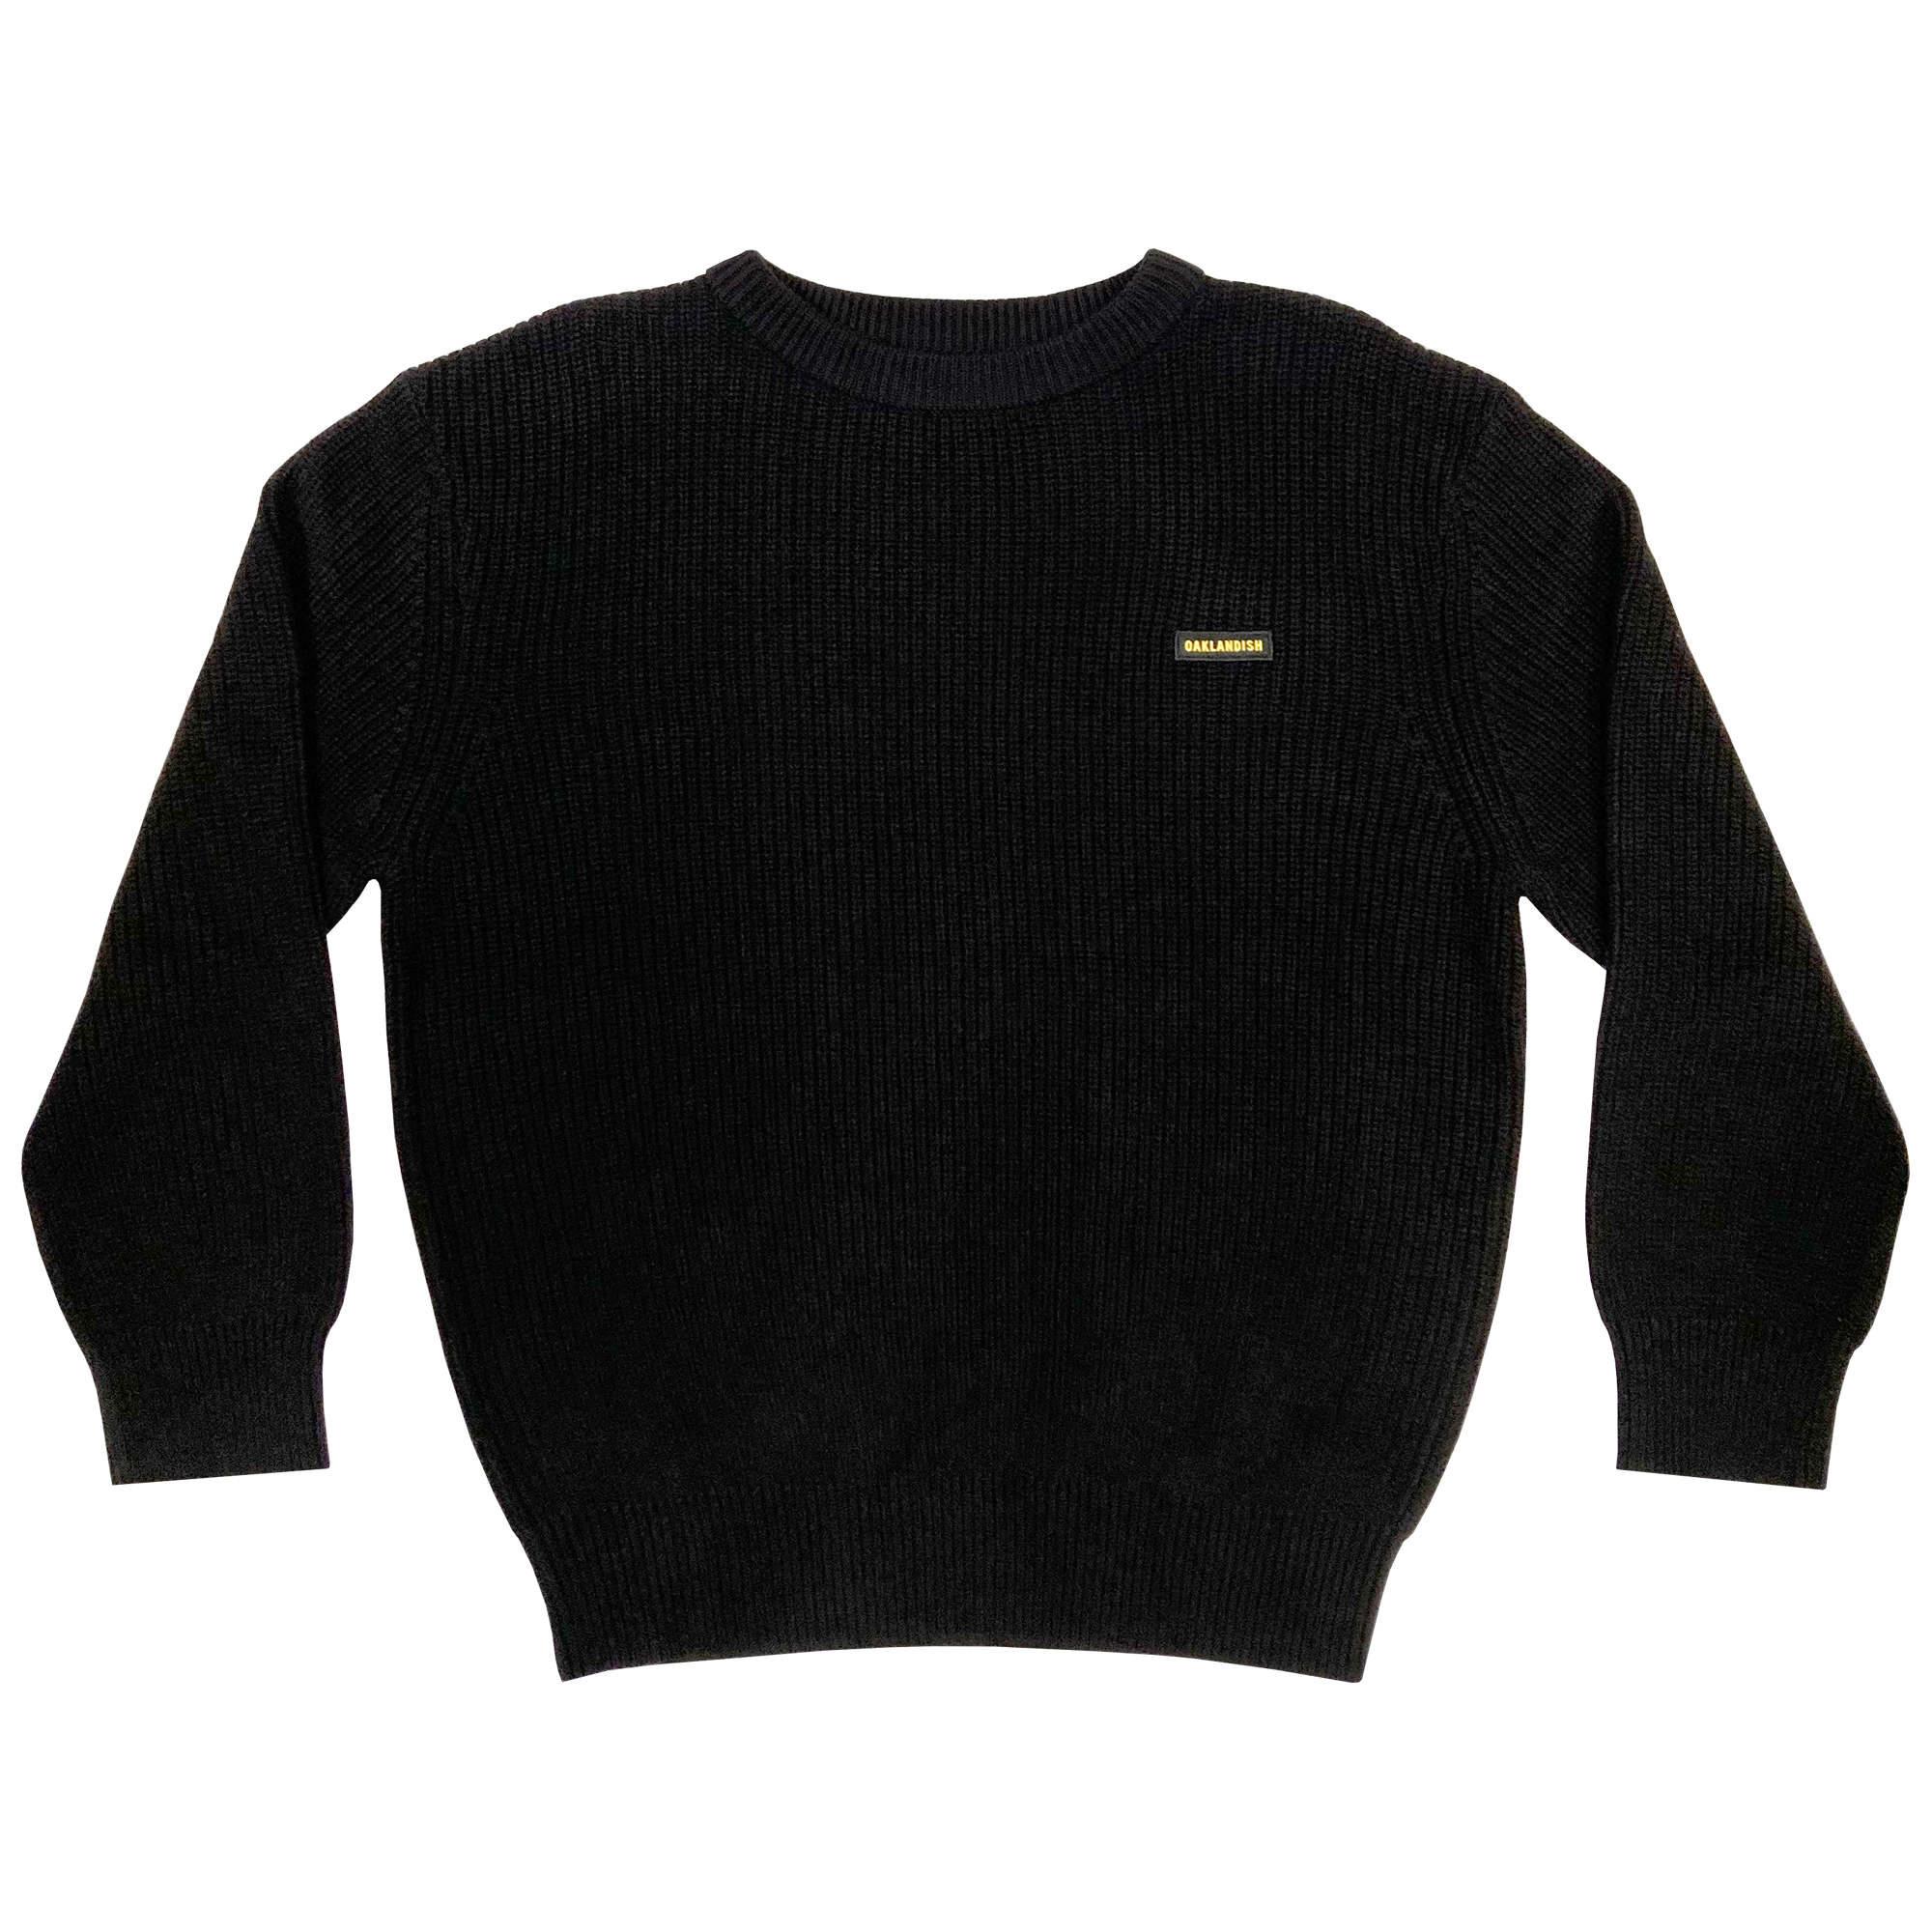 Heavy cotton knit sweater with embroidered Oaklandish wordmark woven label patch on front left chest in black.